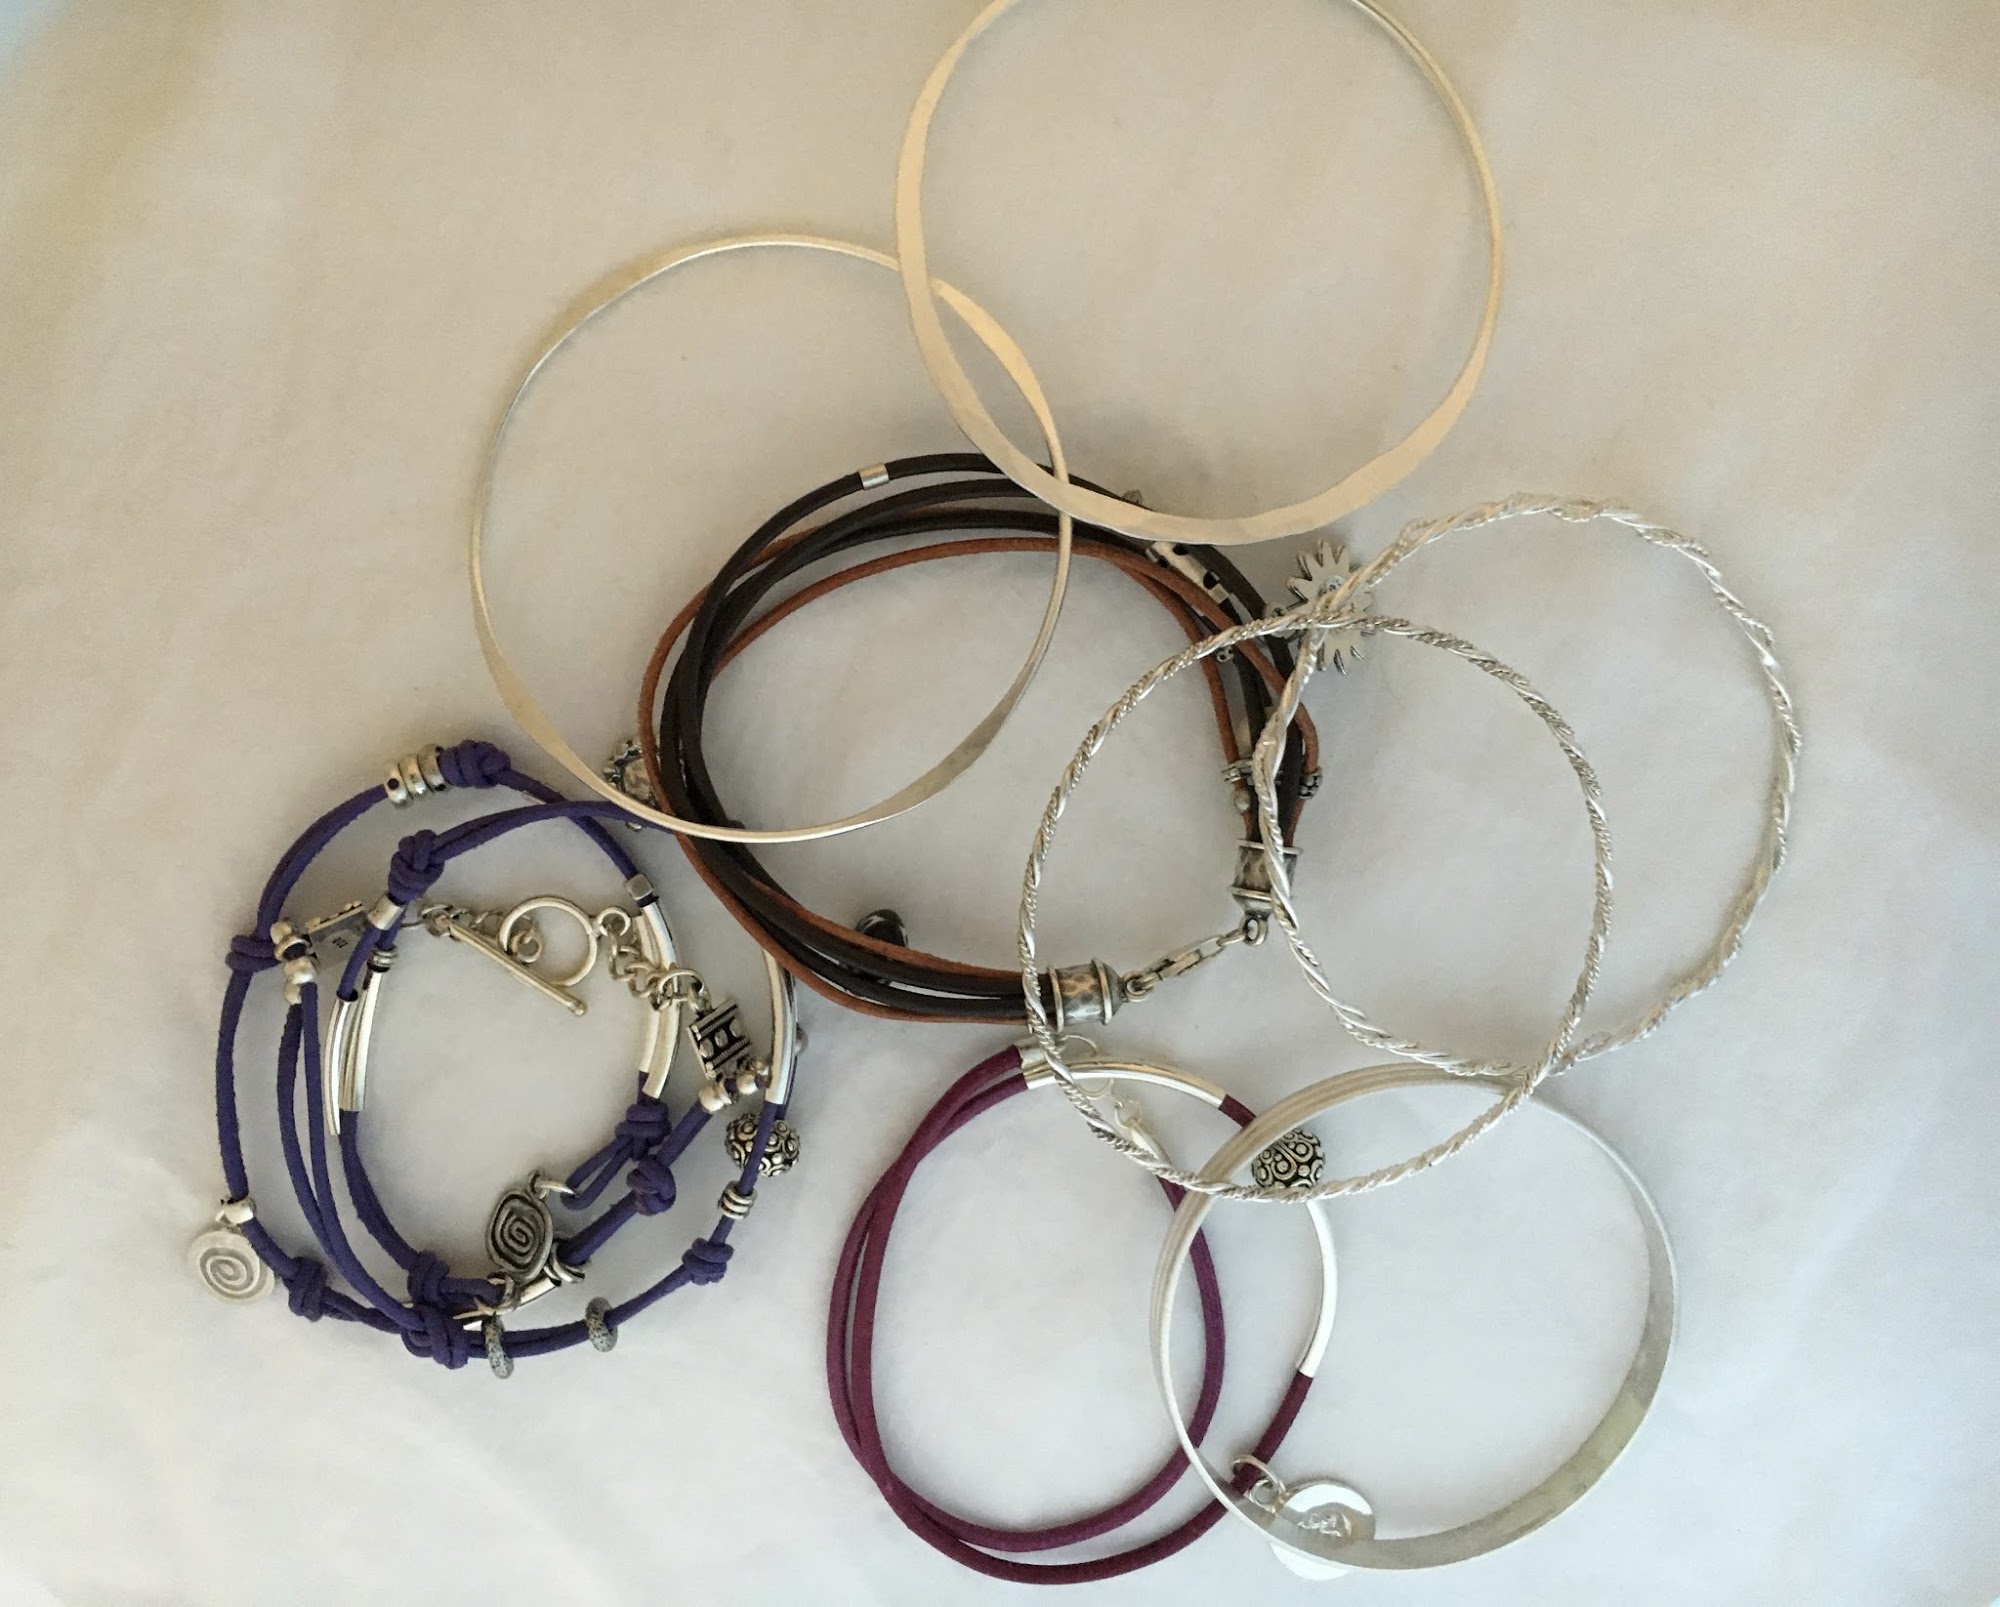 Baubles, Bangles 'n Beads Jewelry